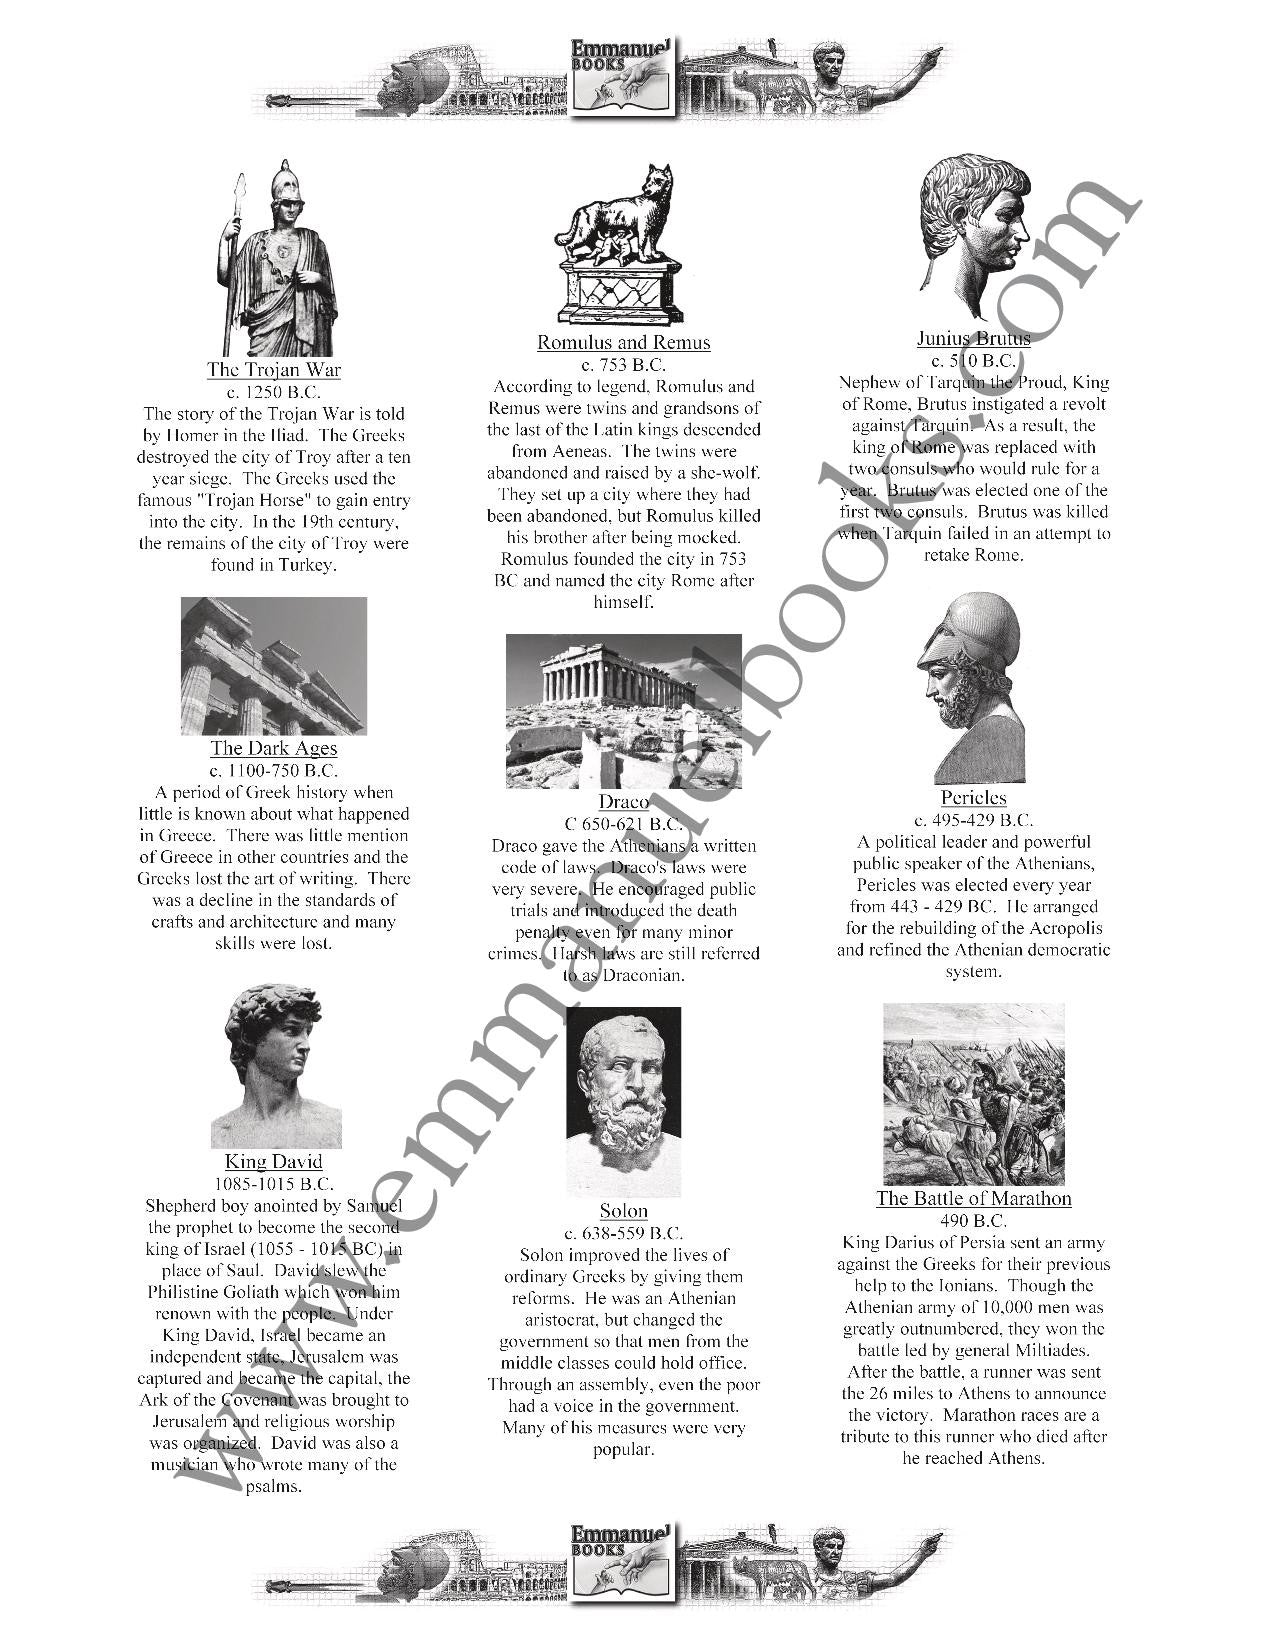 History Worth Remembering Timeline Figures VOL. 4: Ancient Greece and Rome eBook